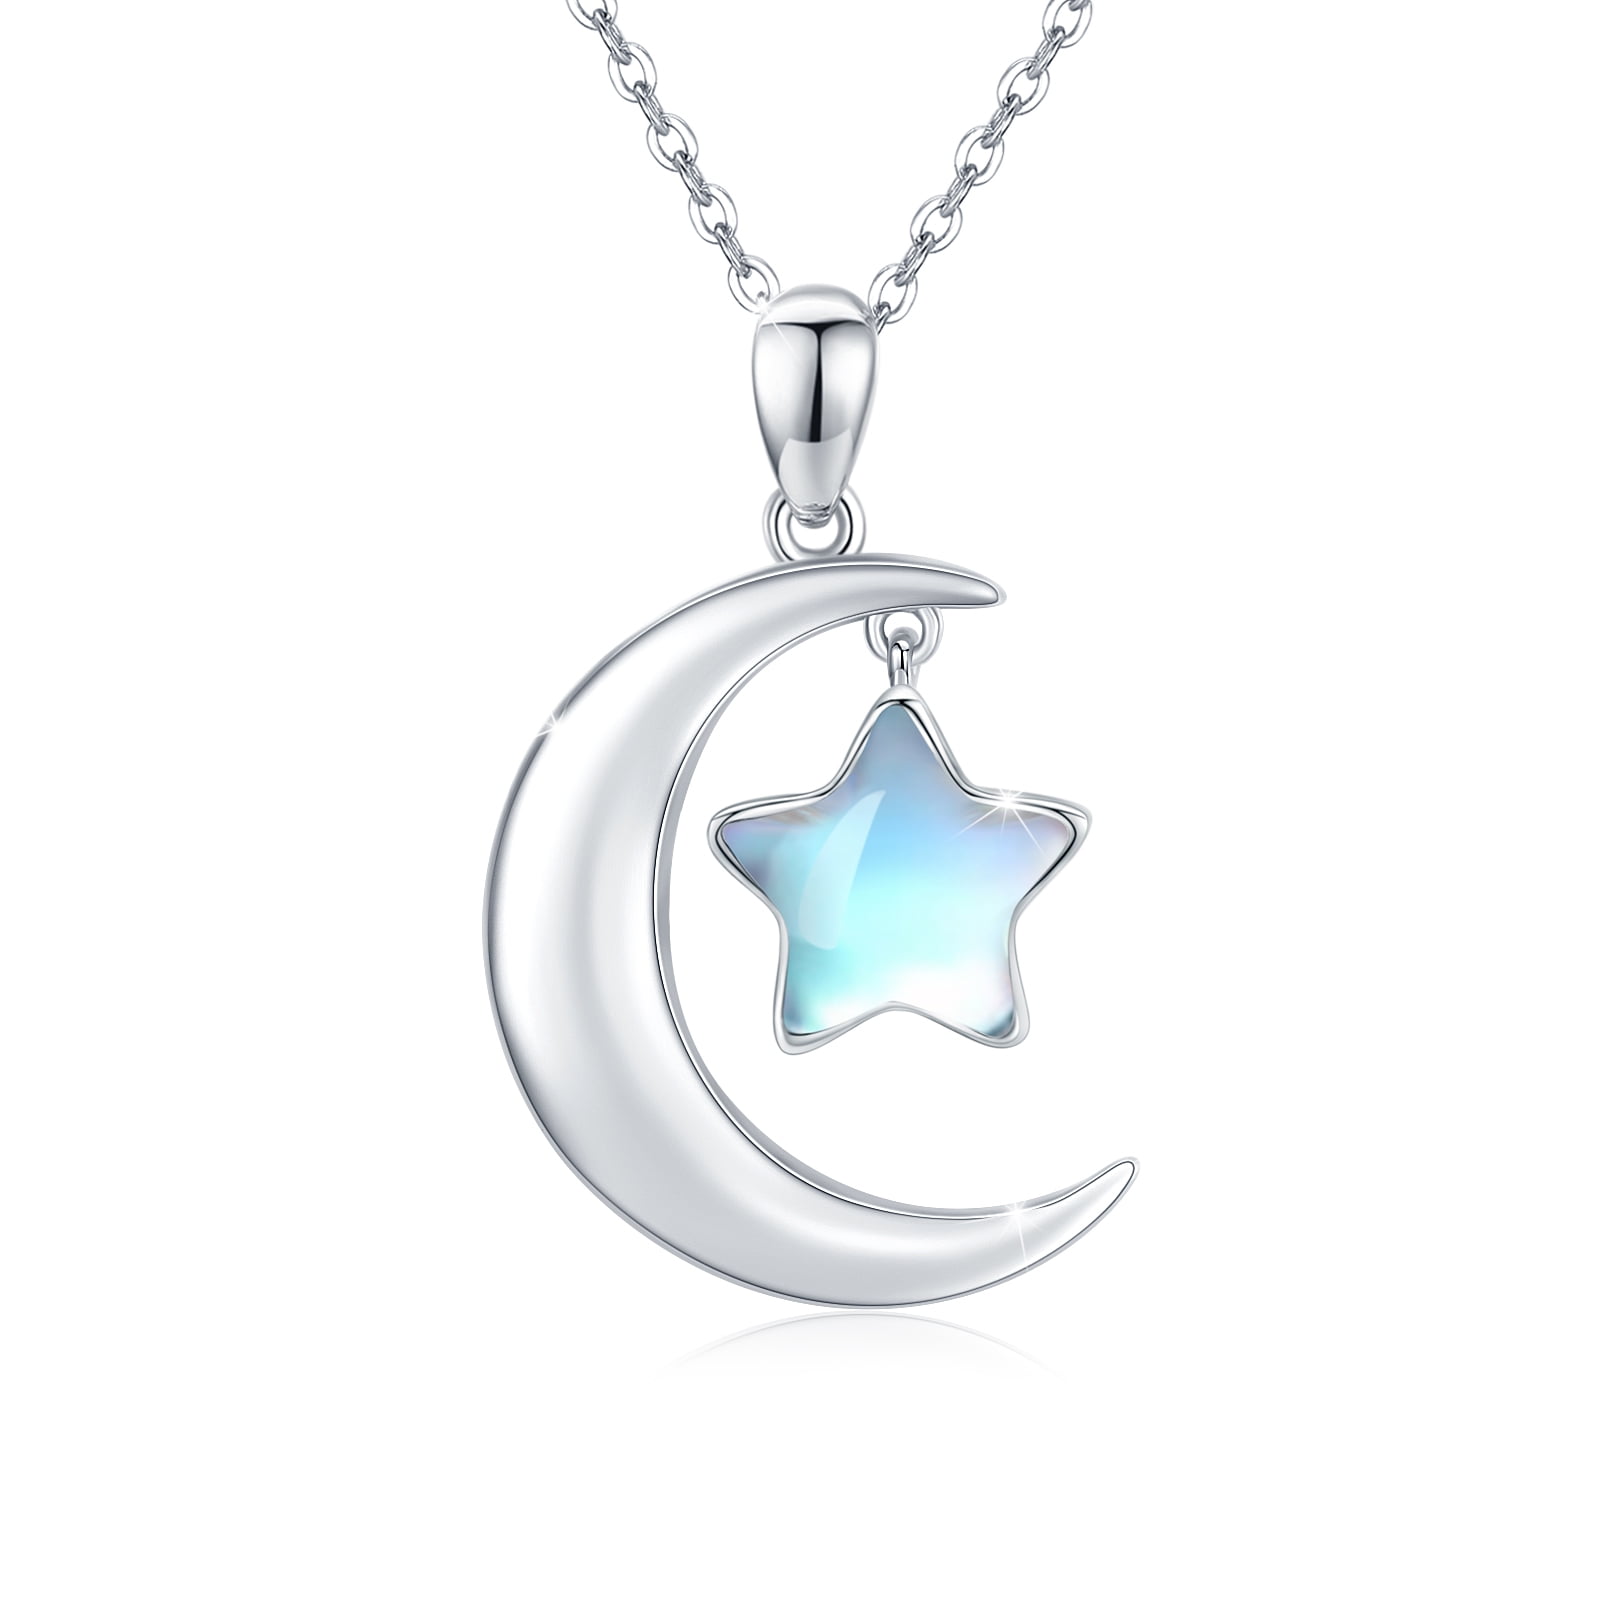  Choker Long Chain Necklace for Women and Girls Five Pointed  Star Fashion Collarbone Necklace Girl Simple Short Pendants Students  Birthday Gift Cute Charm Necklace Chain Statement (Silver, One Size) :  Sports